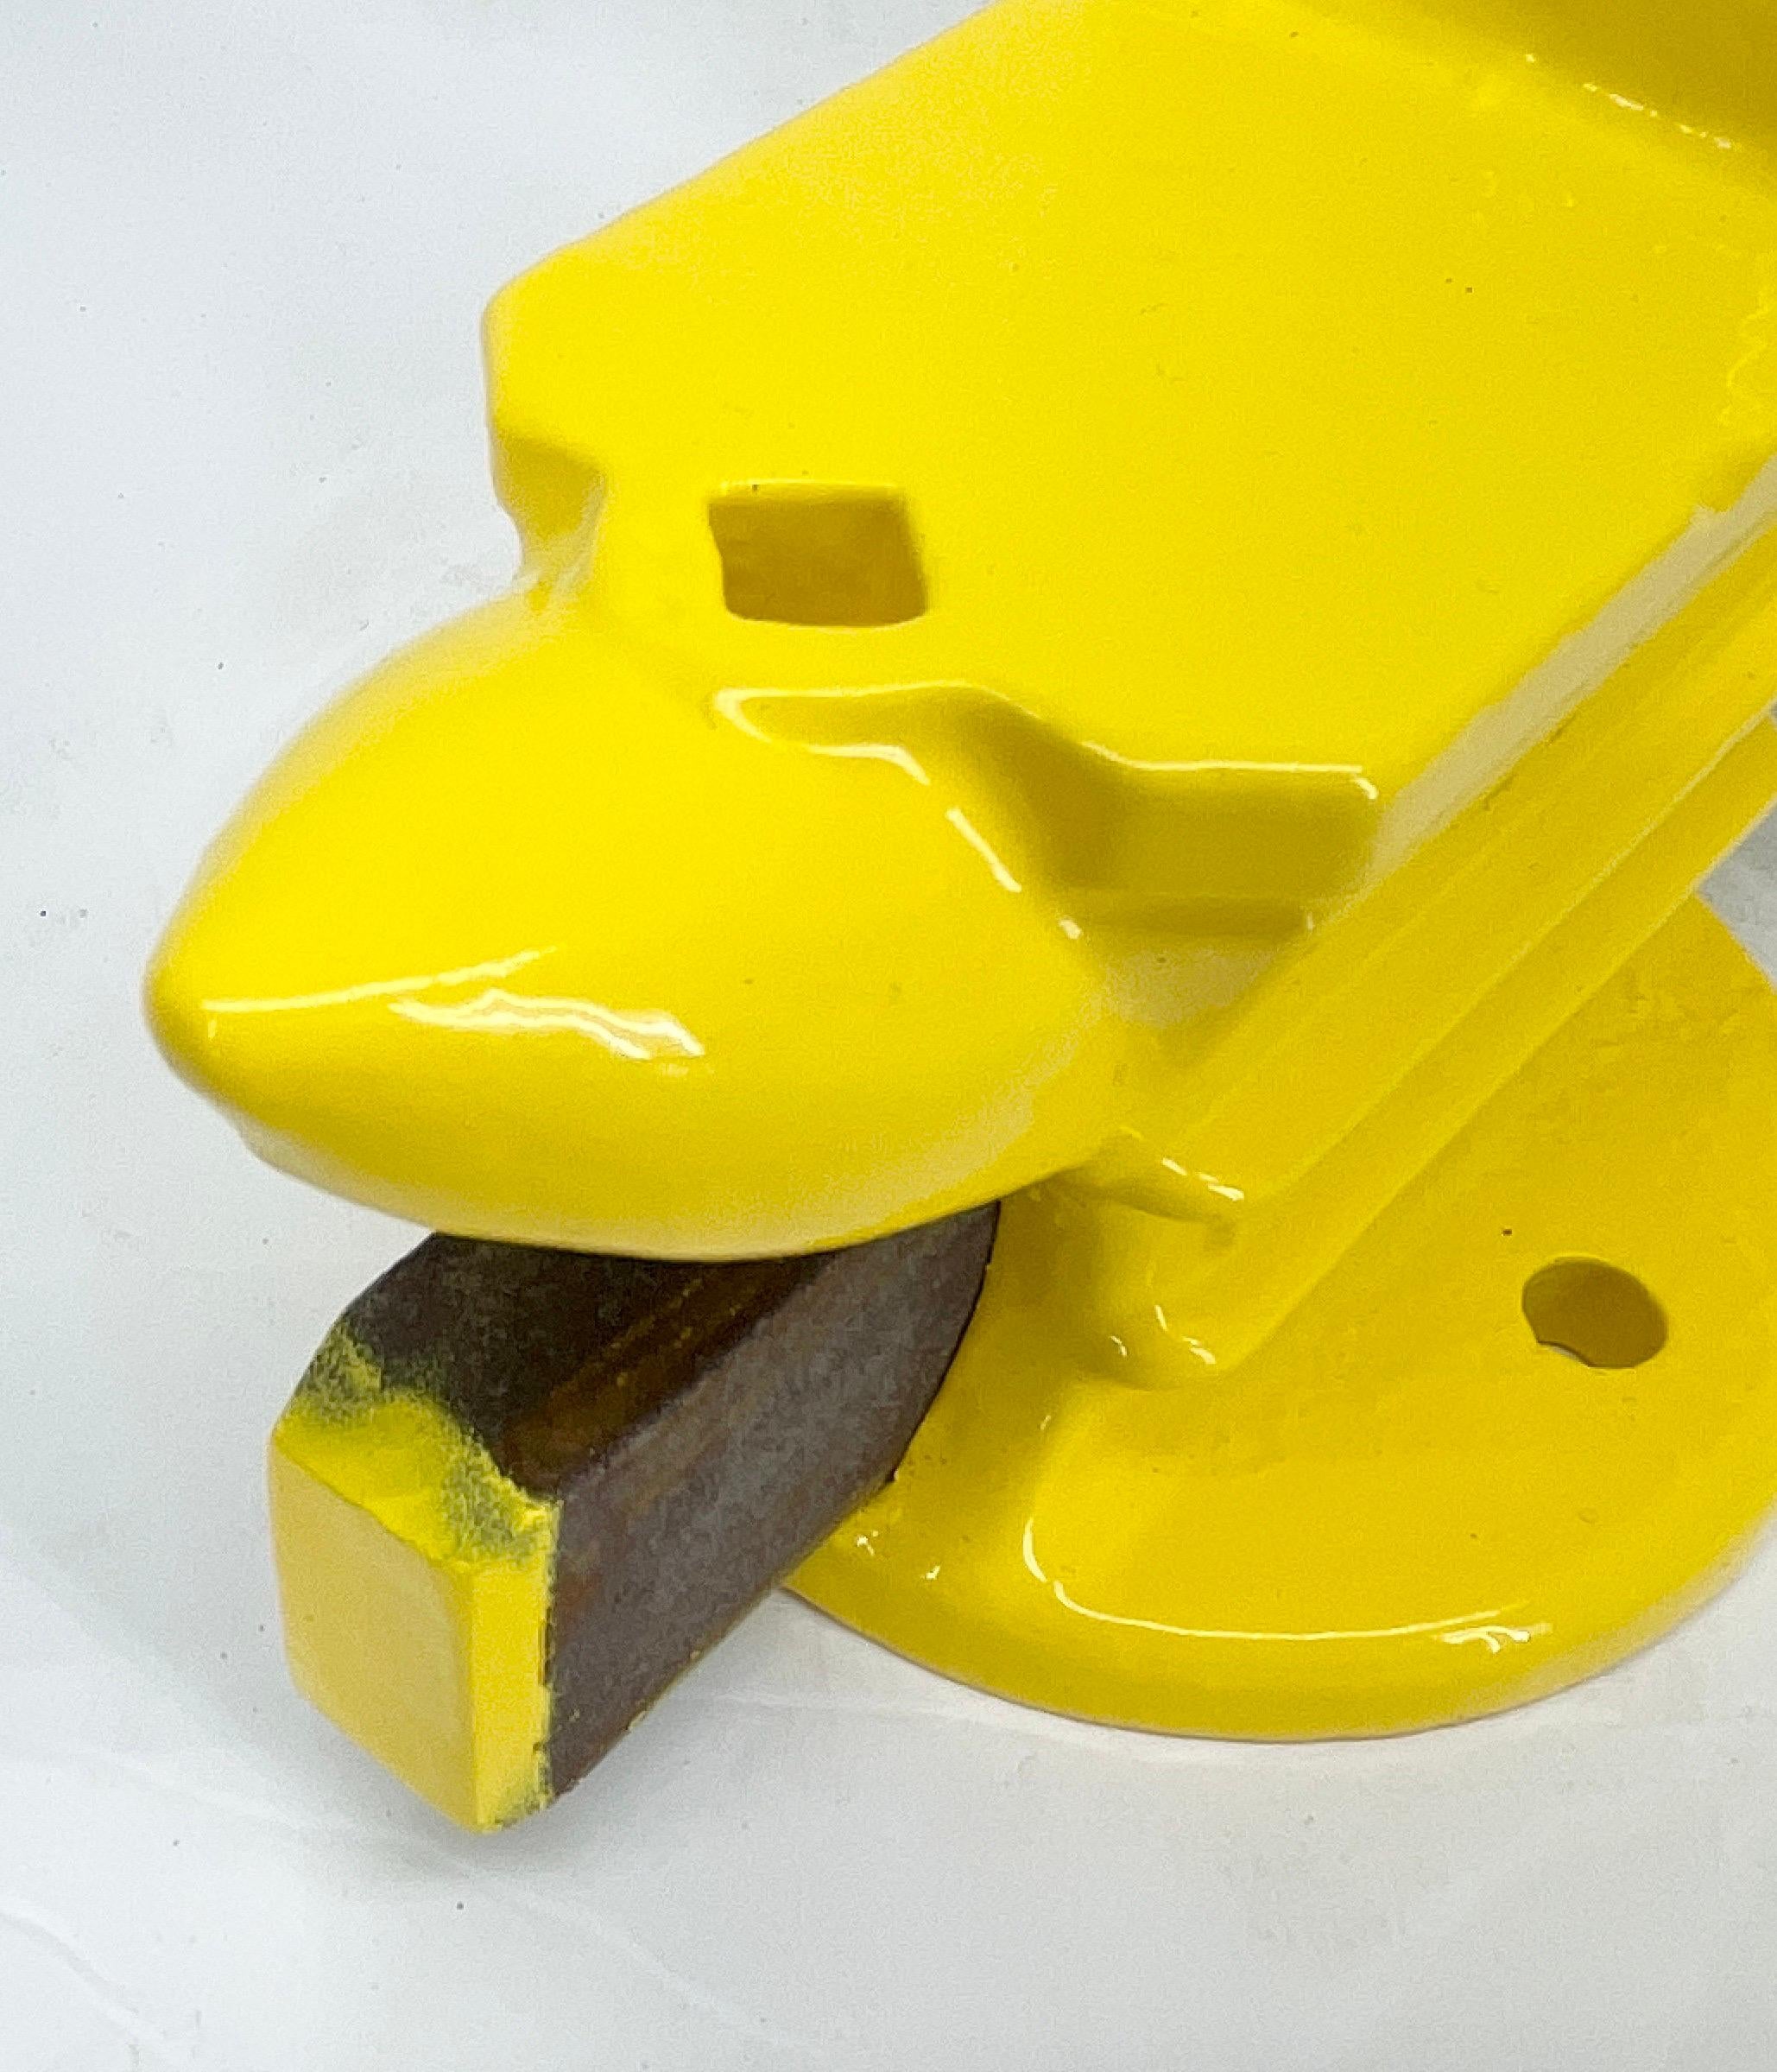 Vintage Tool Vice, Powder Coated Bright Yellow Desk Accessory For Sale 1